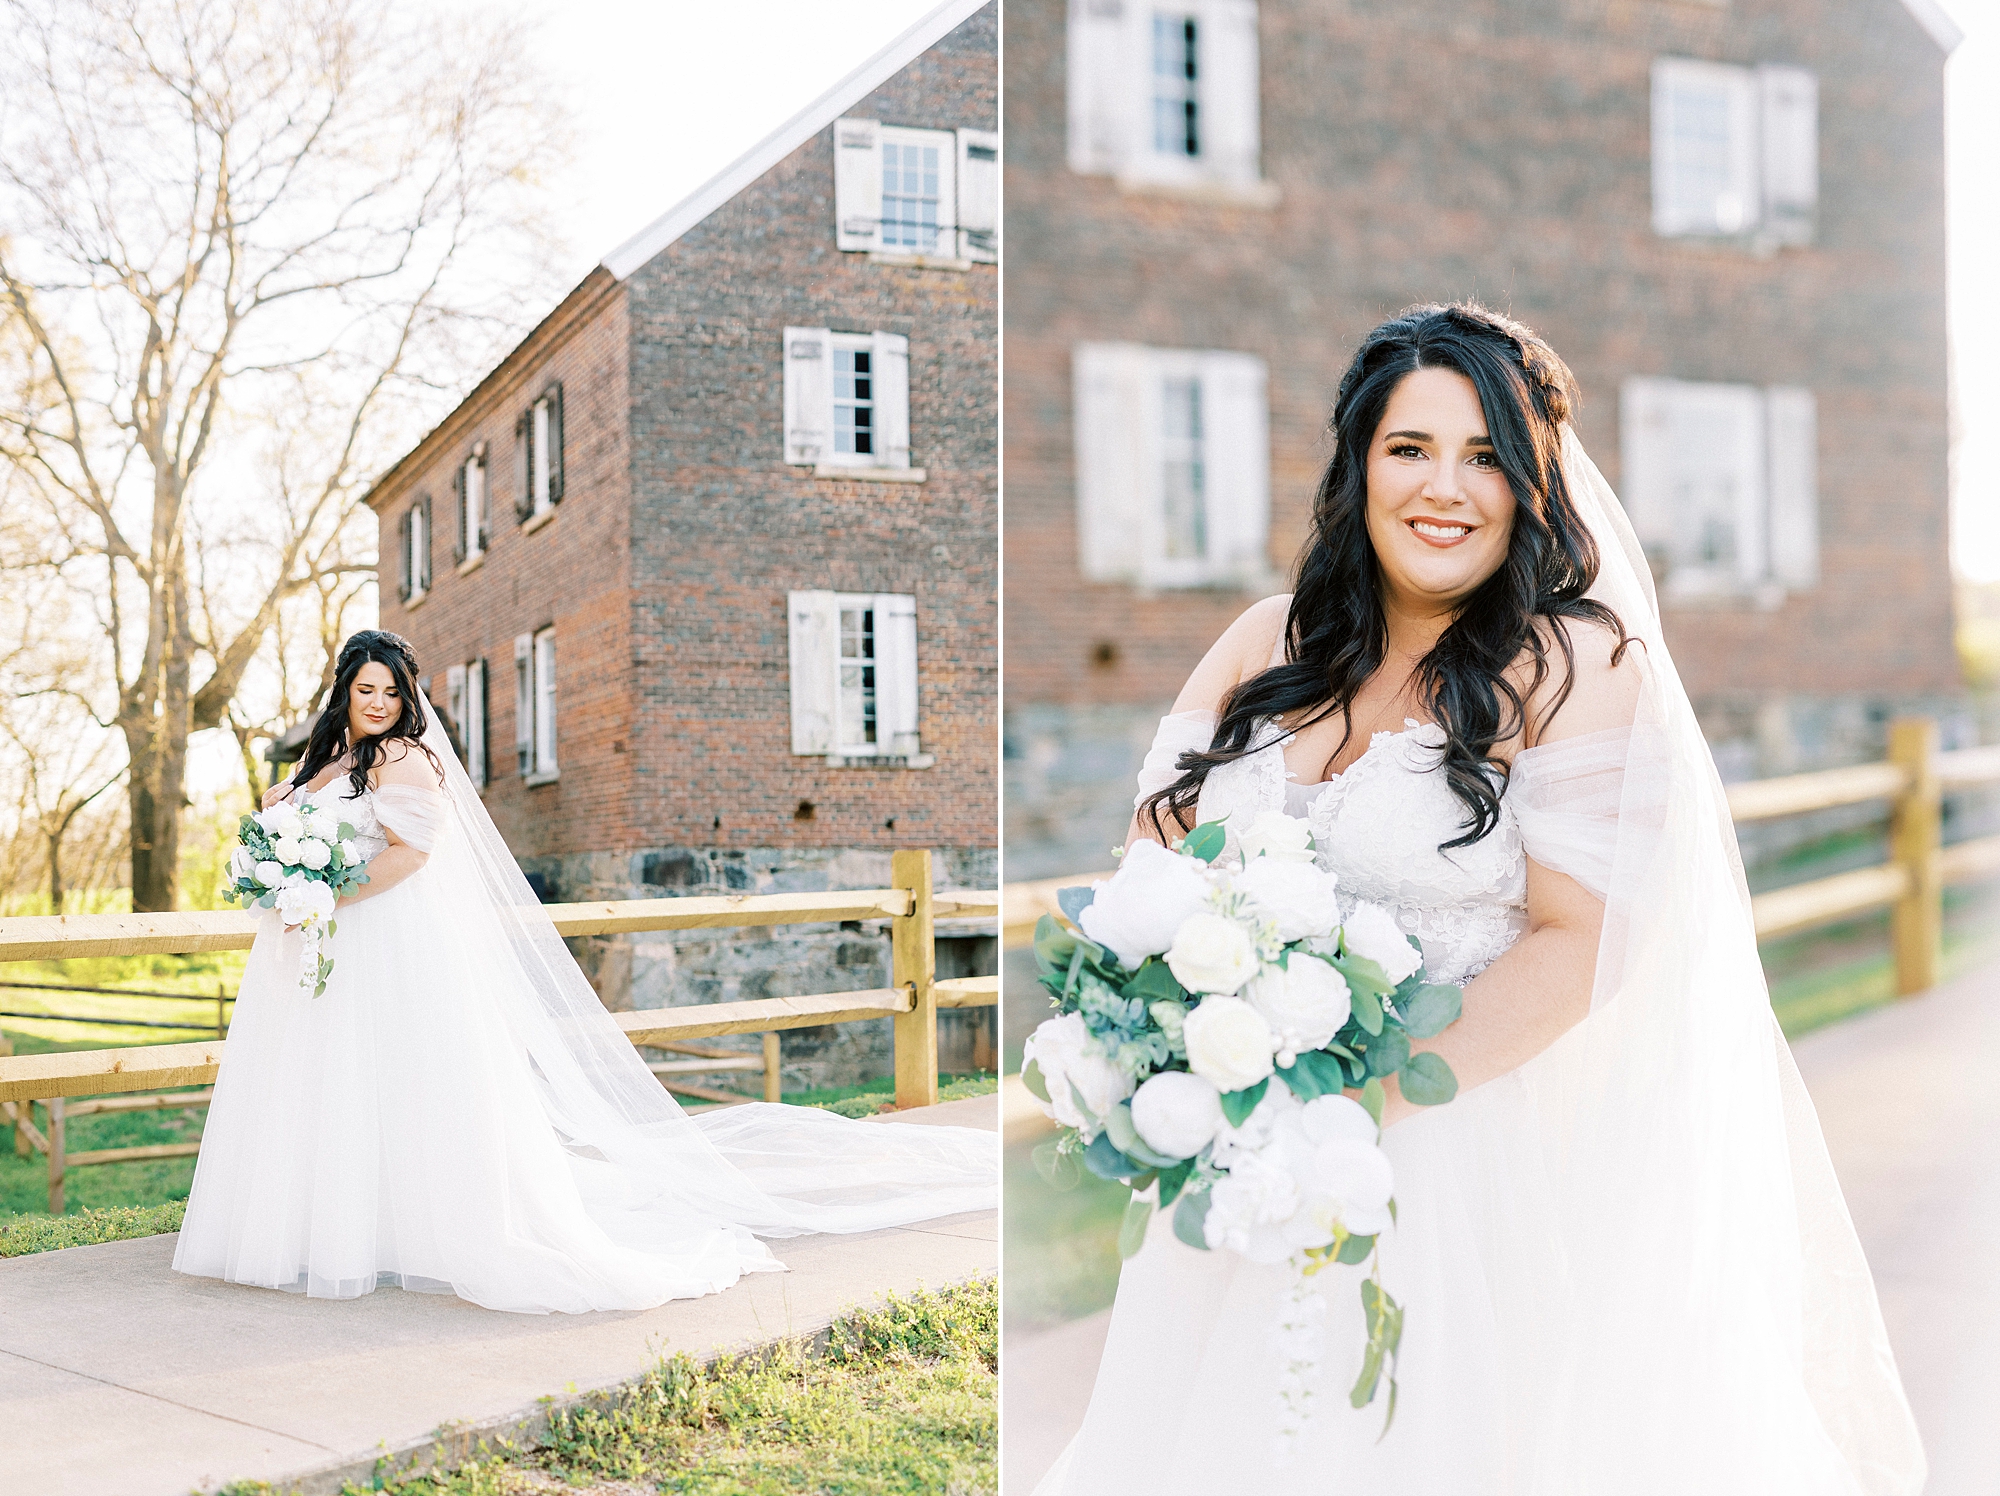 Sloan Park bridal portraits by brick building and wooden fence 